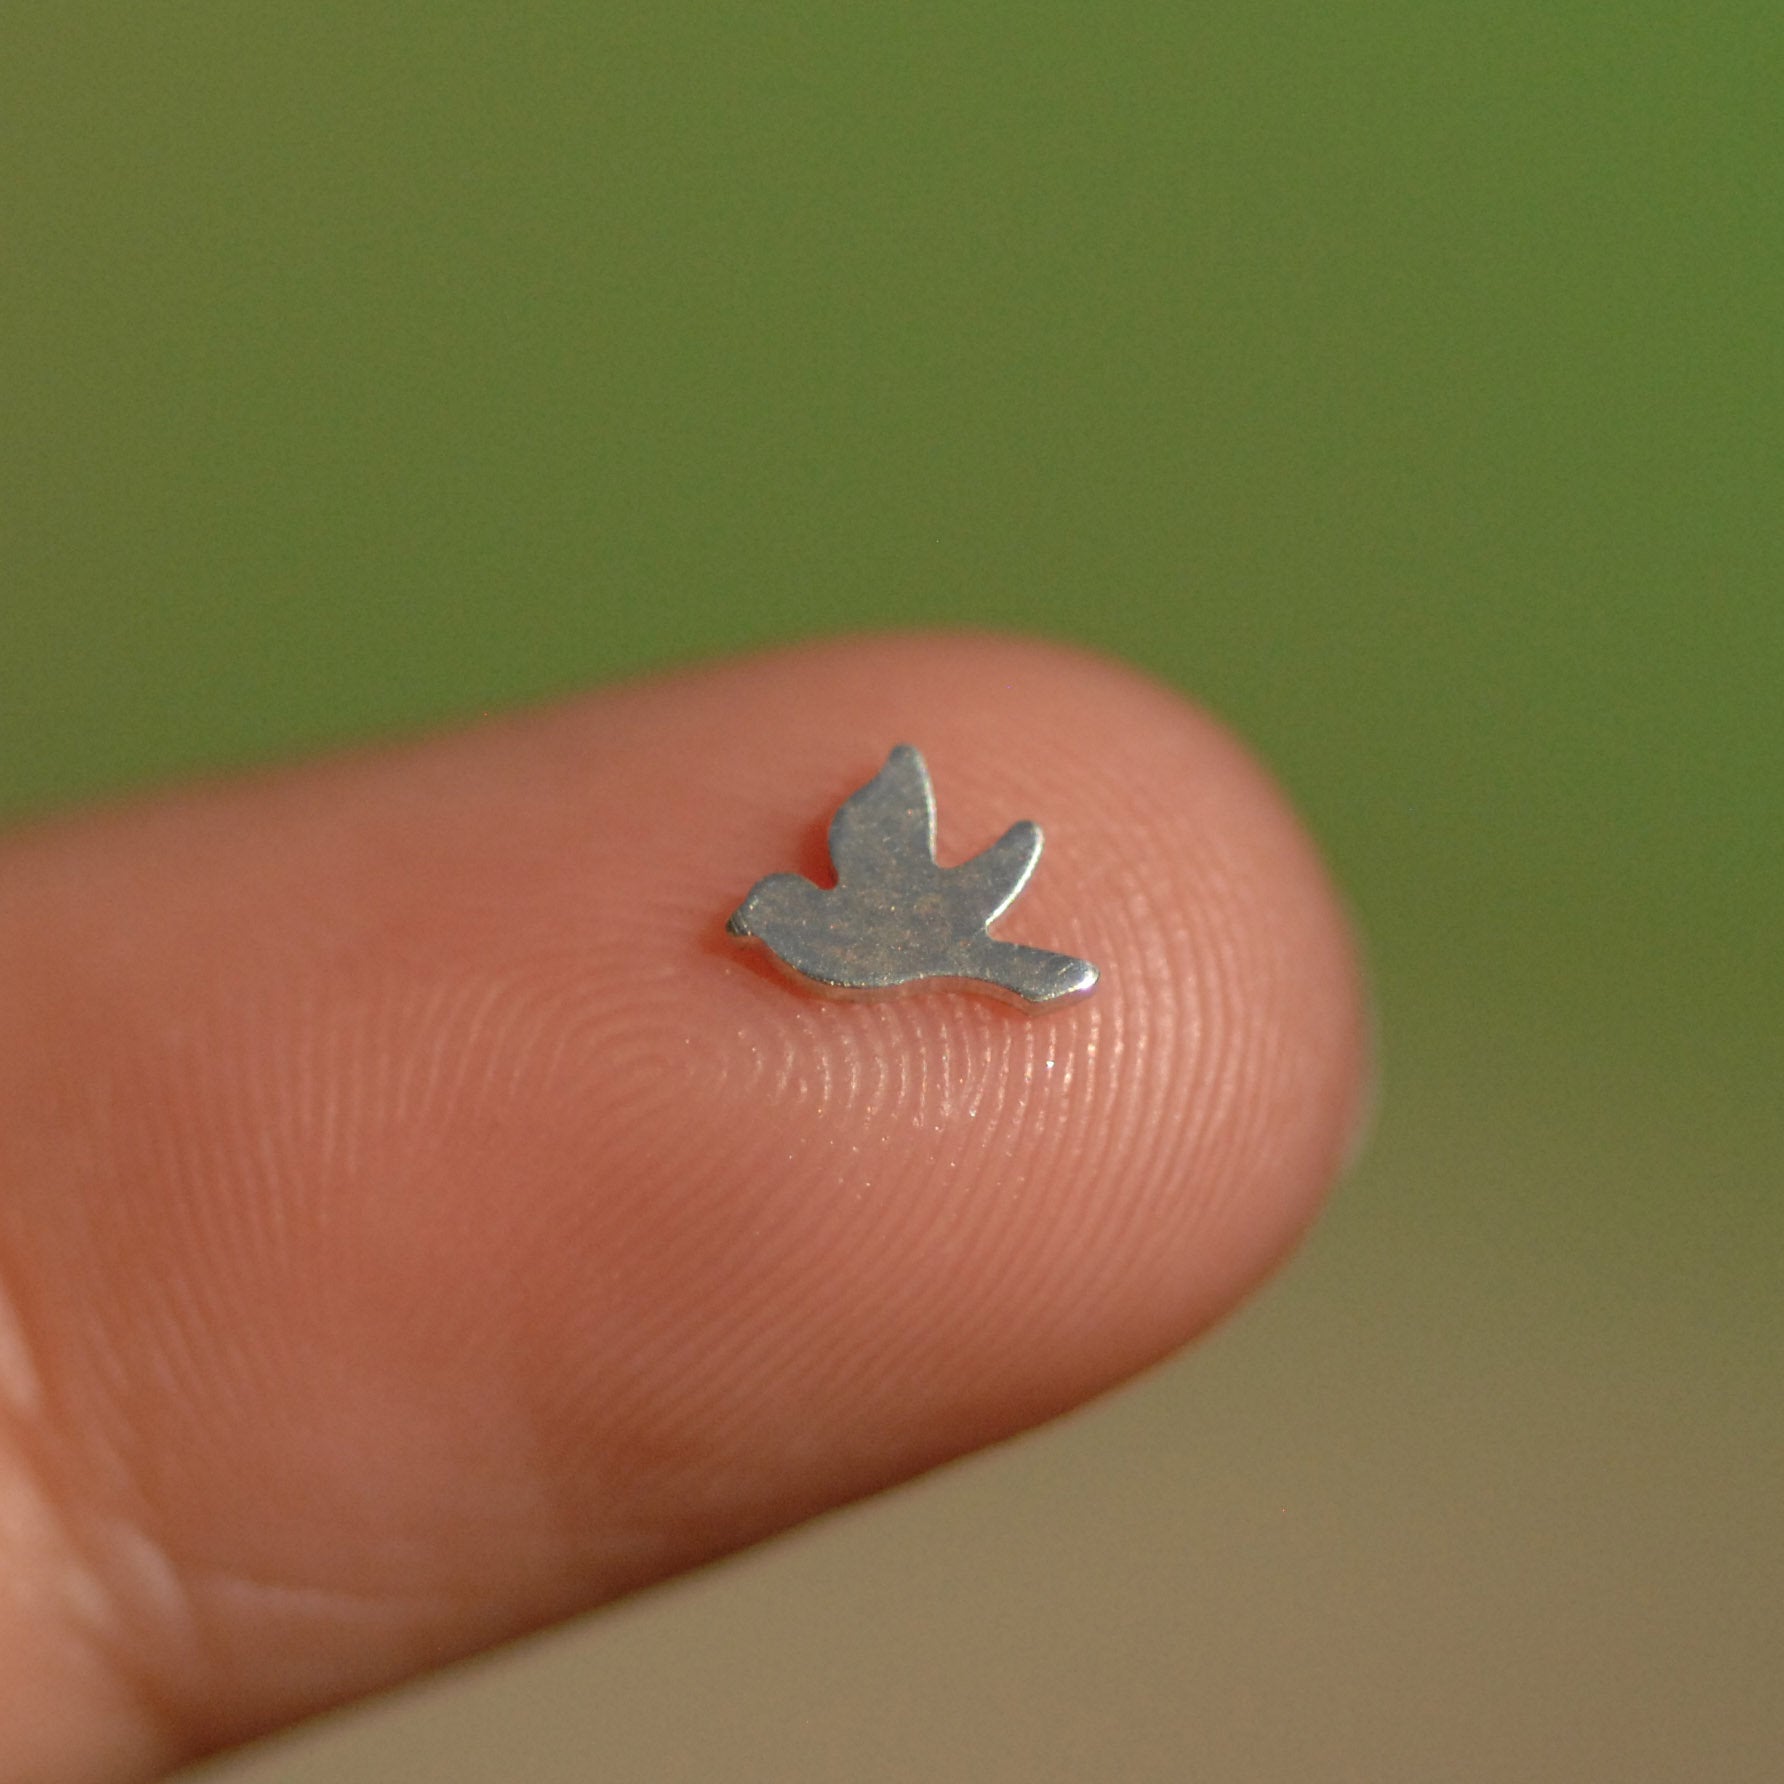 My MOST Super Tiny Bird Blank Cutout for 24g DIY Jewelry Soldering Tiny Blanks for Jewelry Making Mini shape, Supplies by SupplyDiva